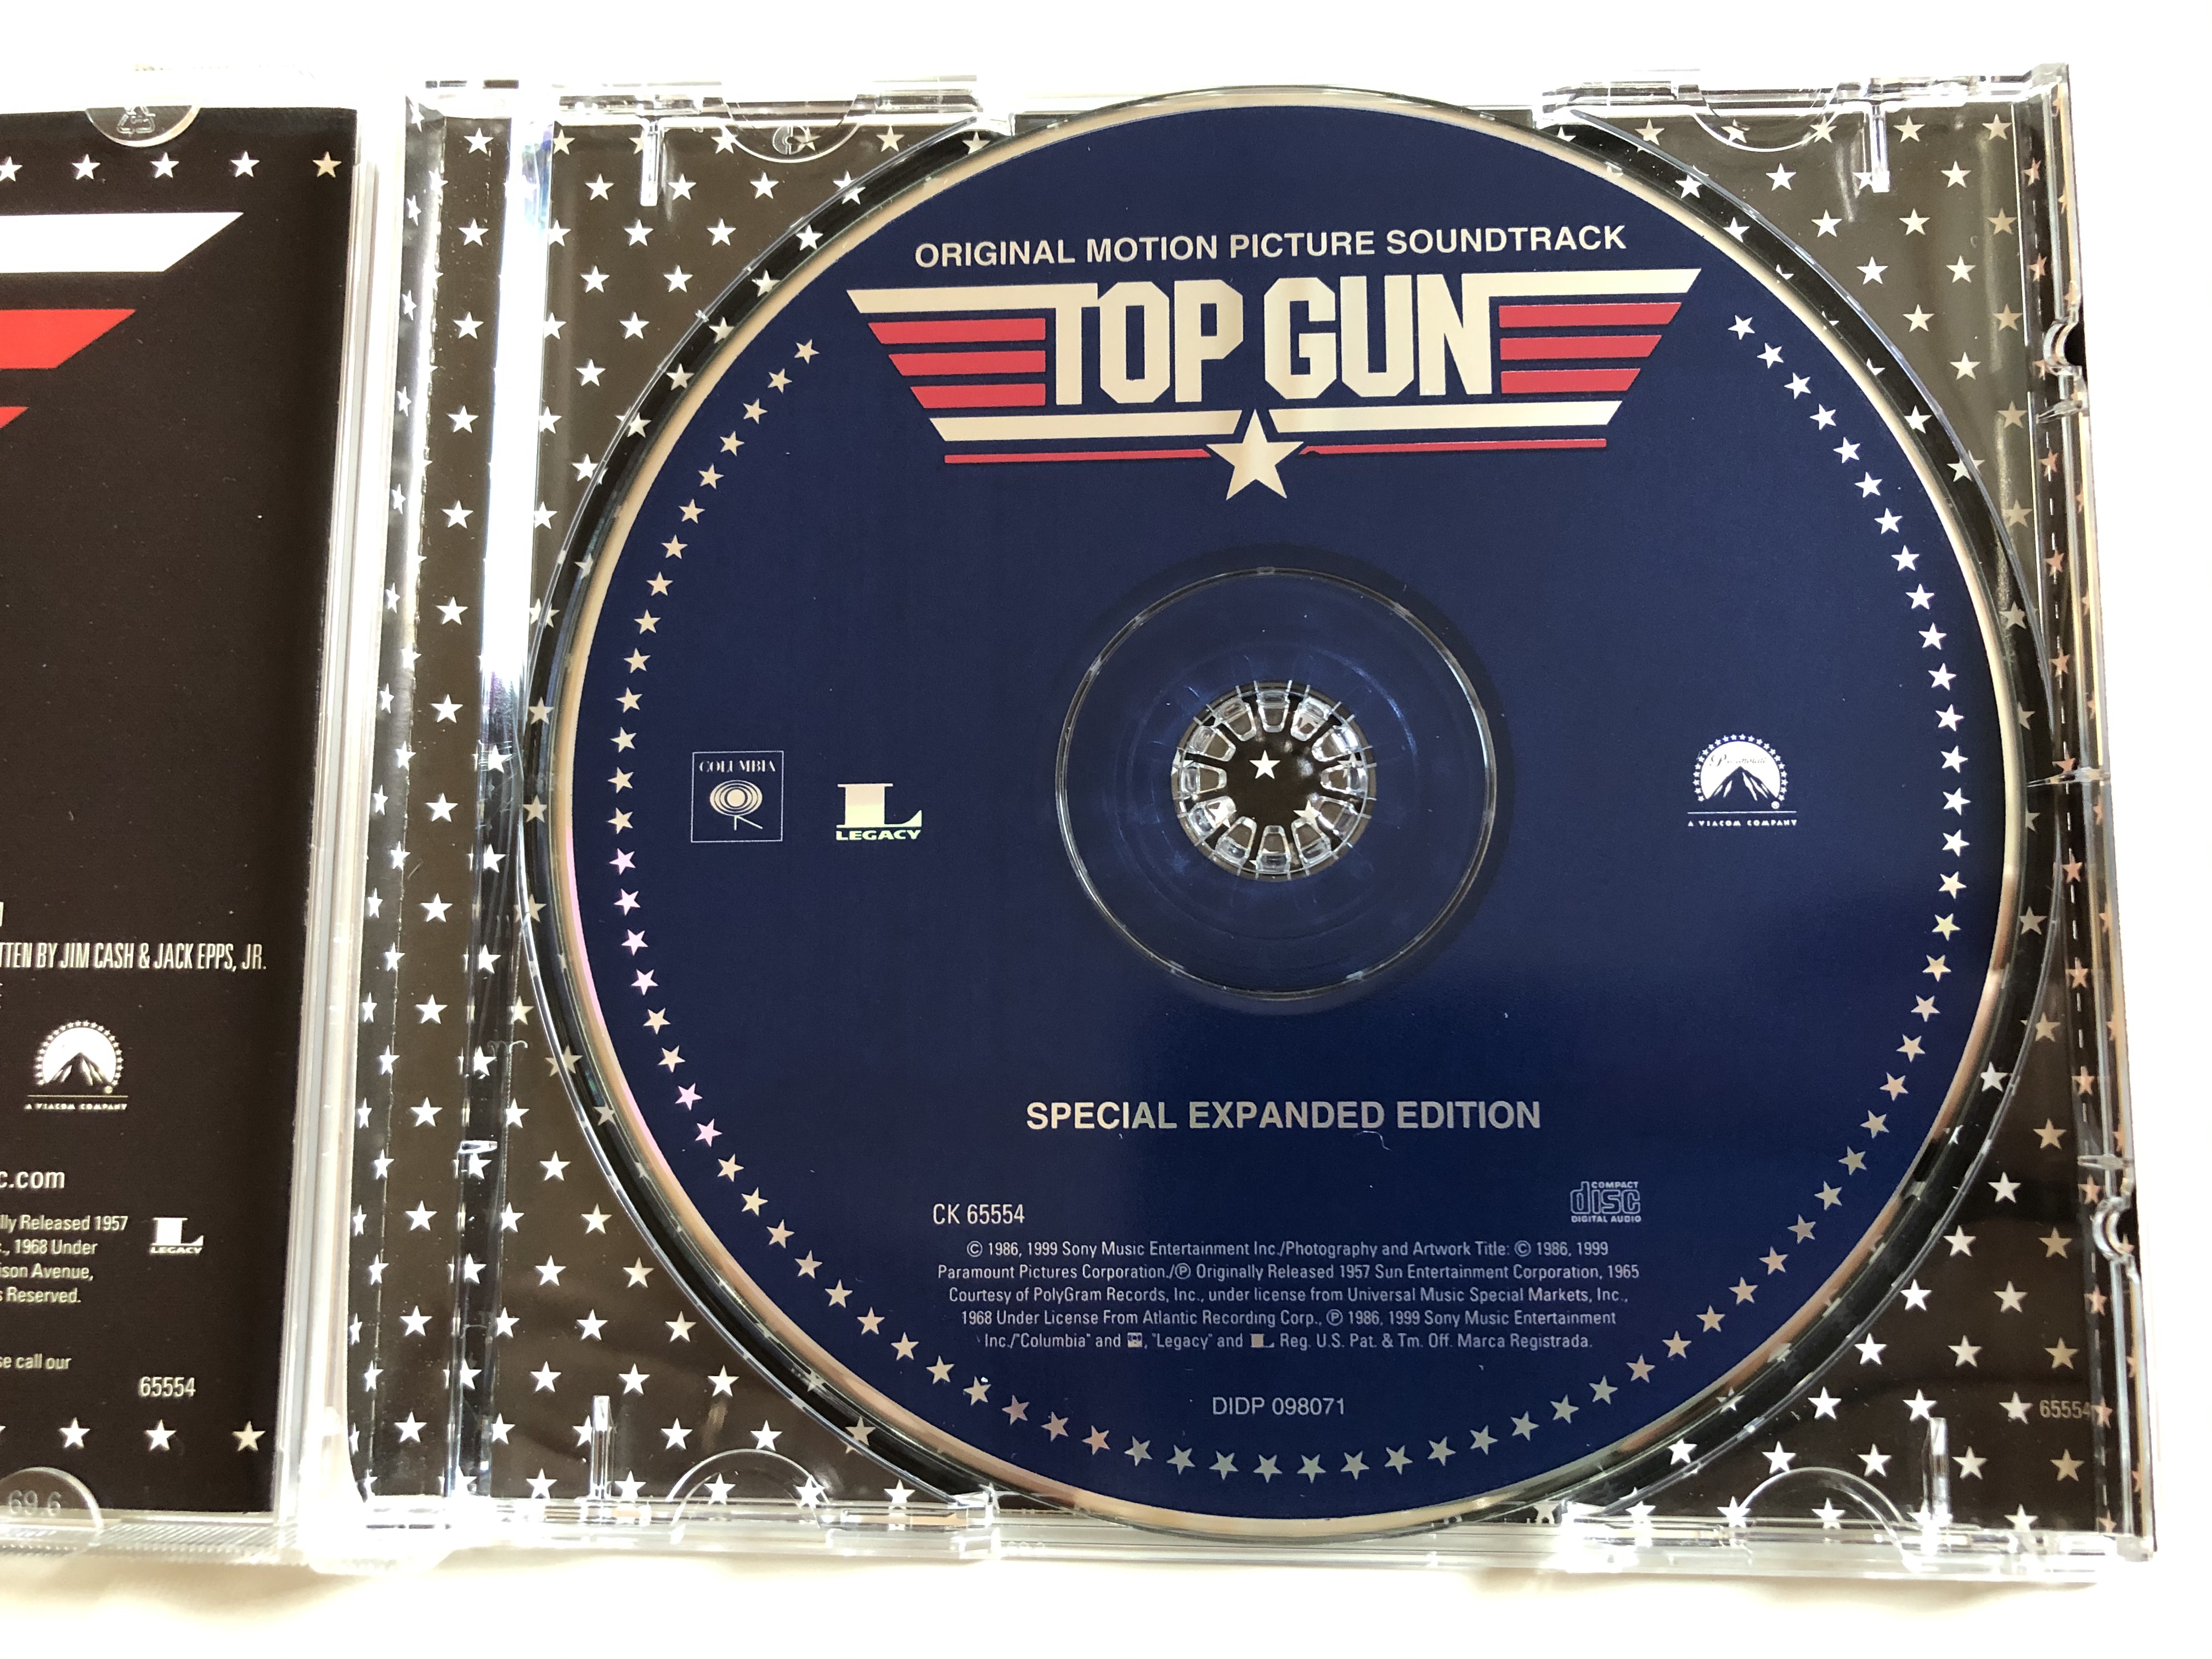 Original Motion Picture Soundtrack - Top Gun / Special Expanded Edition /  Kenny Loggins: Danger Zone, Cheap Trick: Mighty Wings, Kenny Loggins:  Playing With The Boys, Teena Marie: Lead Me On... /